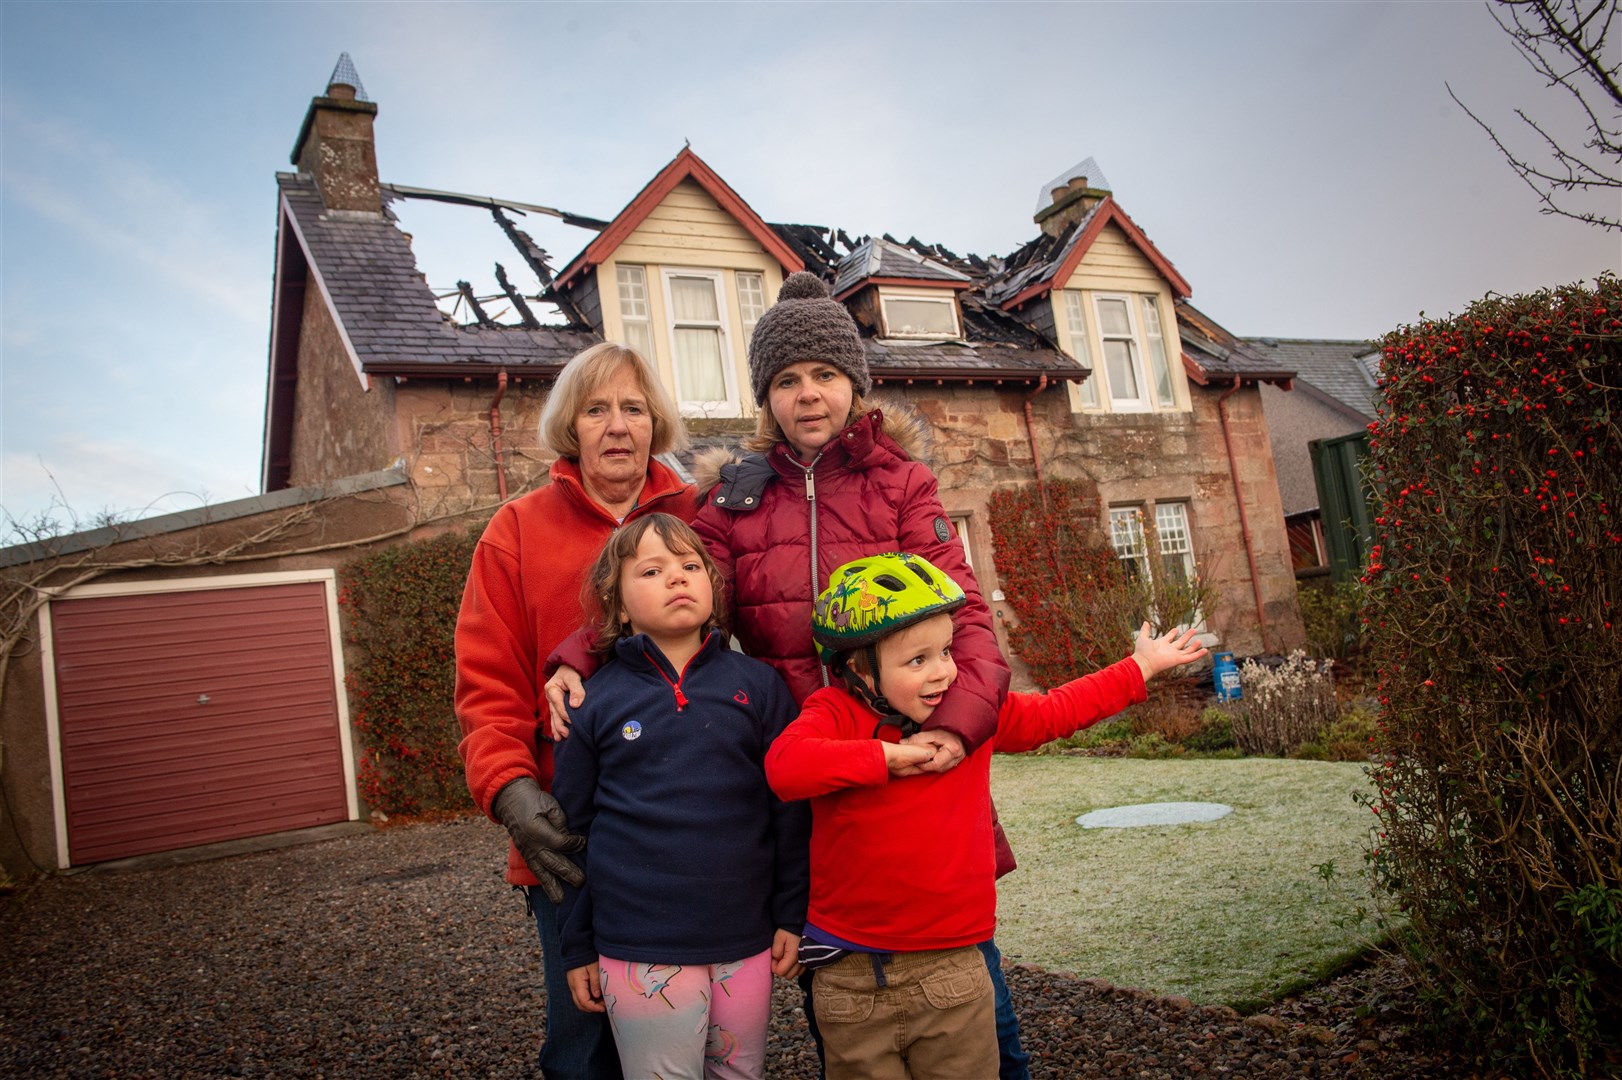 The aftermath of a devastating house fire in Castle Street, Fortrose.Lois MacDonell, Penelope MacDonell (rear) with (front) Vivienne DeJesus and Mark DeJesus. Picture: Callum Mackay